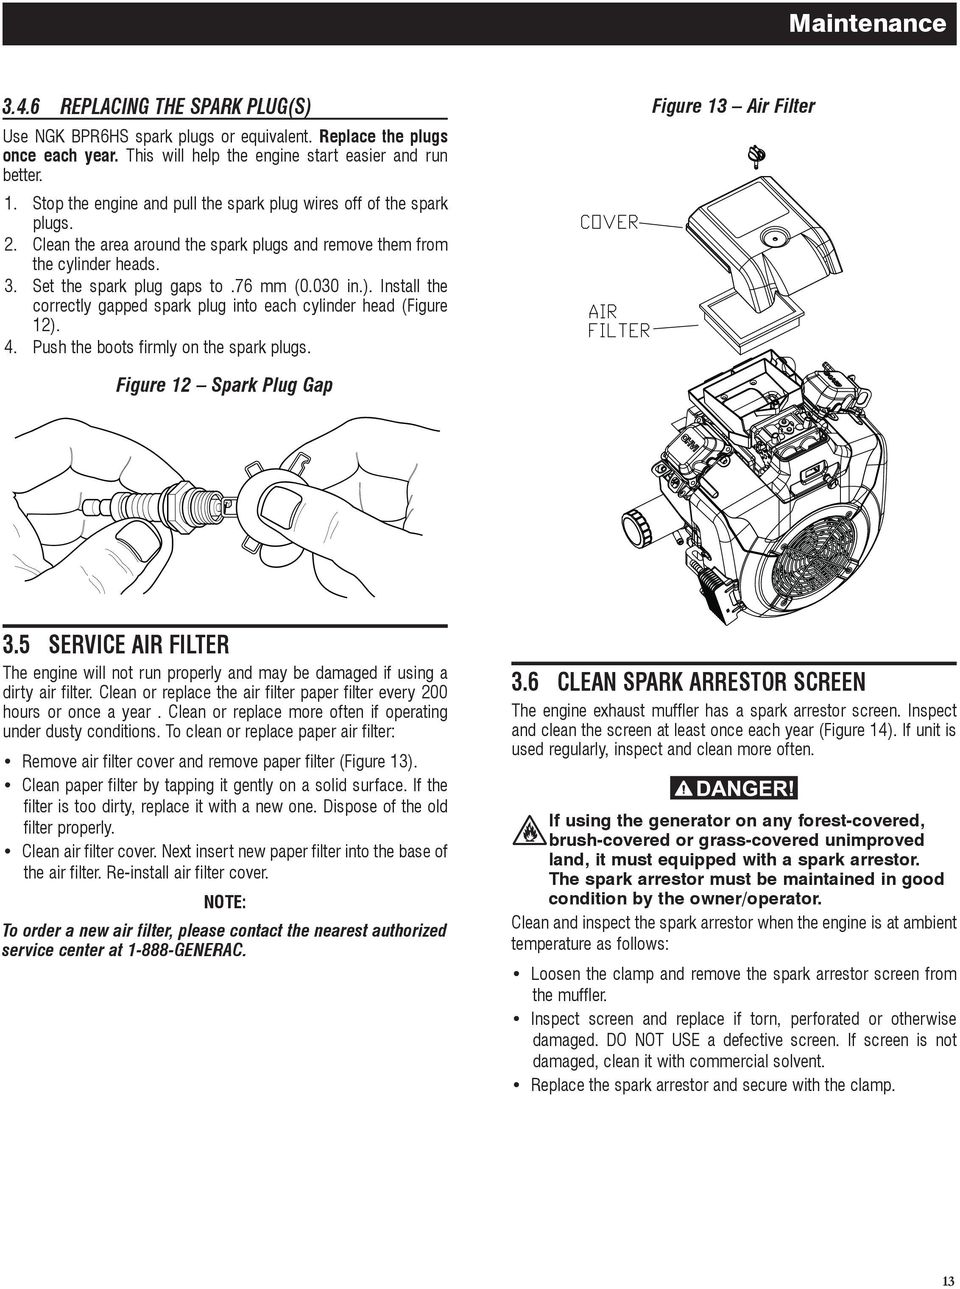 Install the correctly gapped spark plug into each cylinder head (Figure 12). 4. Push the boots firmly on the spark plugs. Figure 13 Air Filter Figure 12 Spark Plug Gap 3.